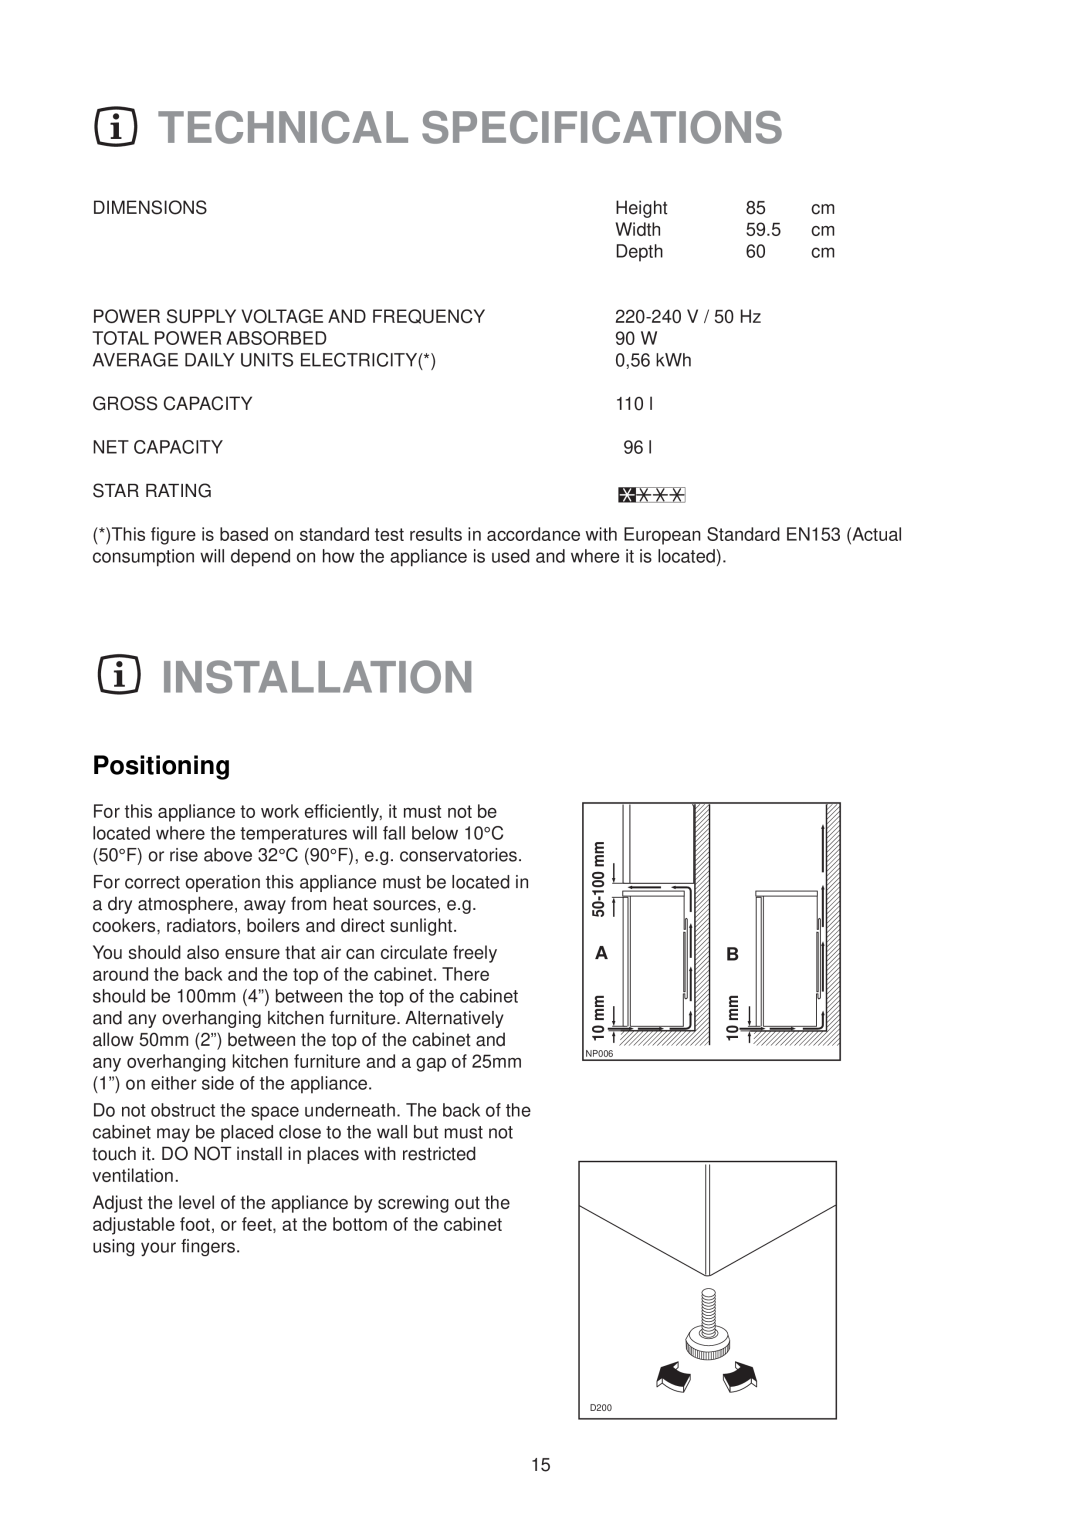 Zanussi ZFE 74 W manual Technical Specifications, Installation, Positioning 